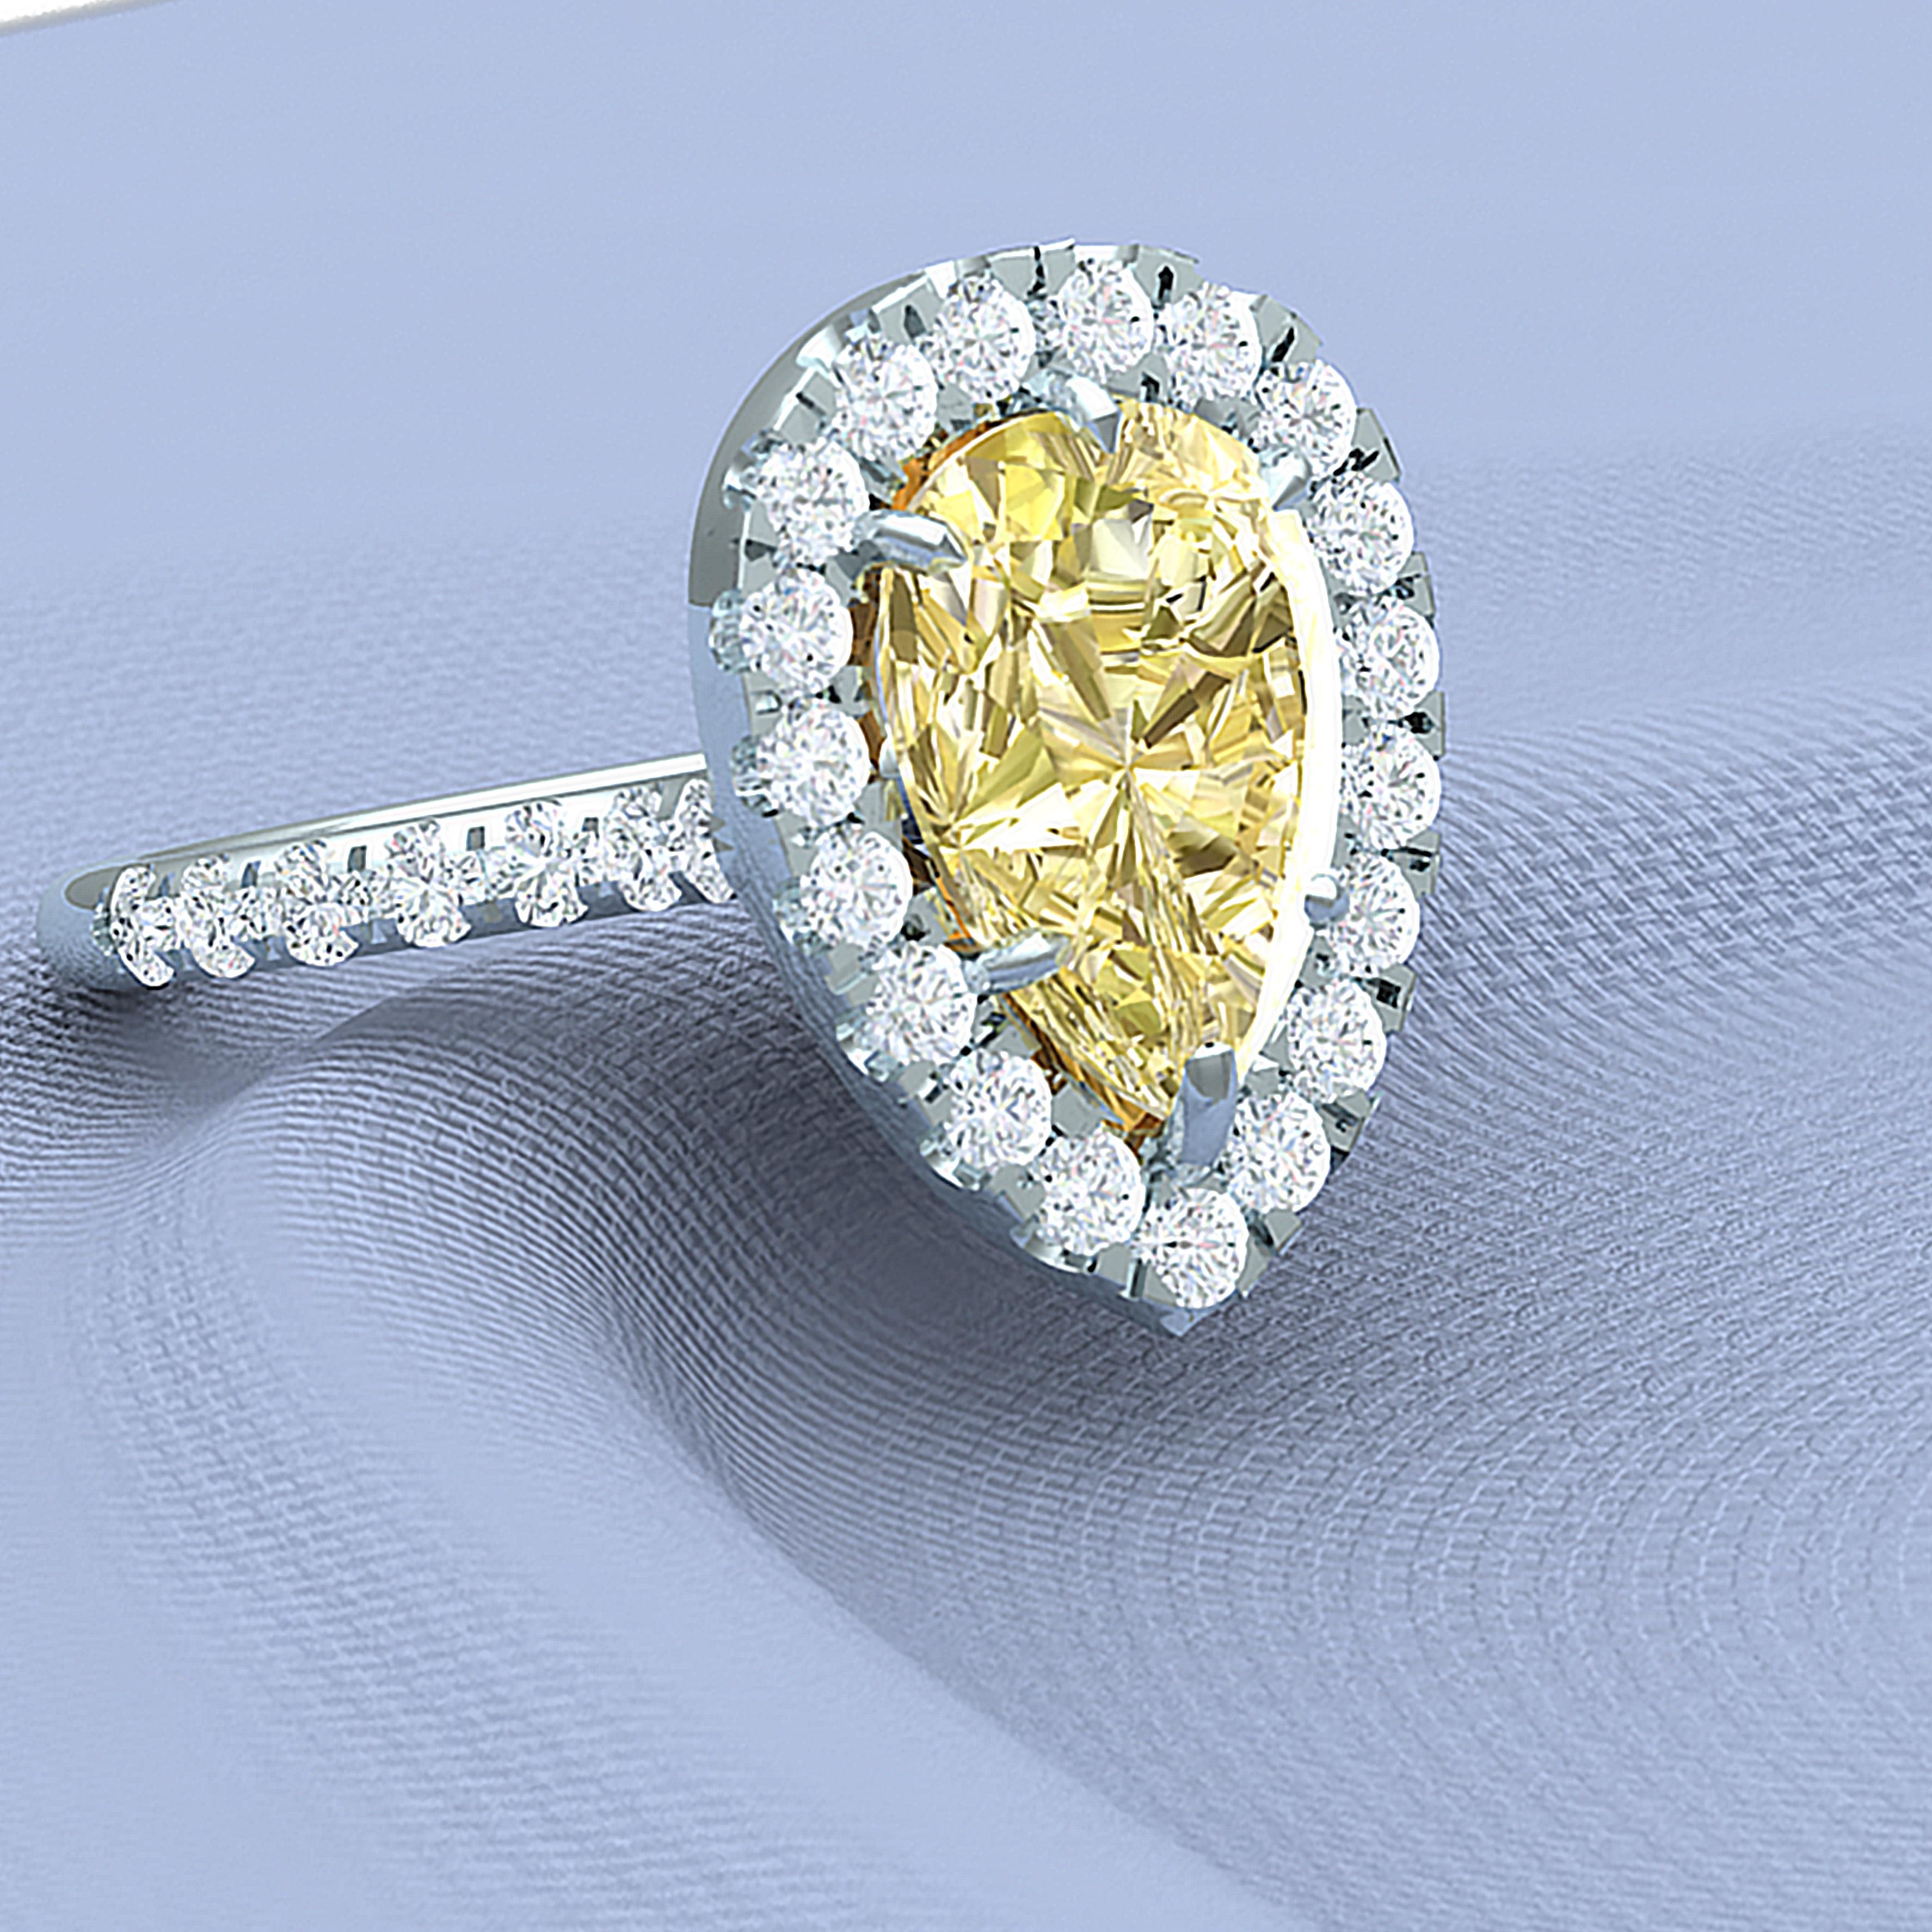 2 Carat Pear Shape Yellow Diamond Engagement Ring In Excellent Condition For Sale In Aliso Viejo, CA